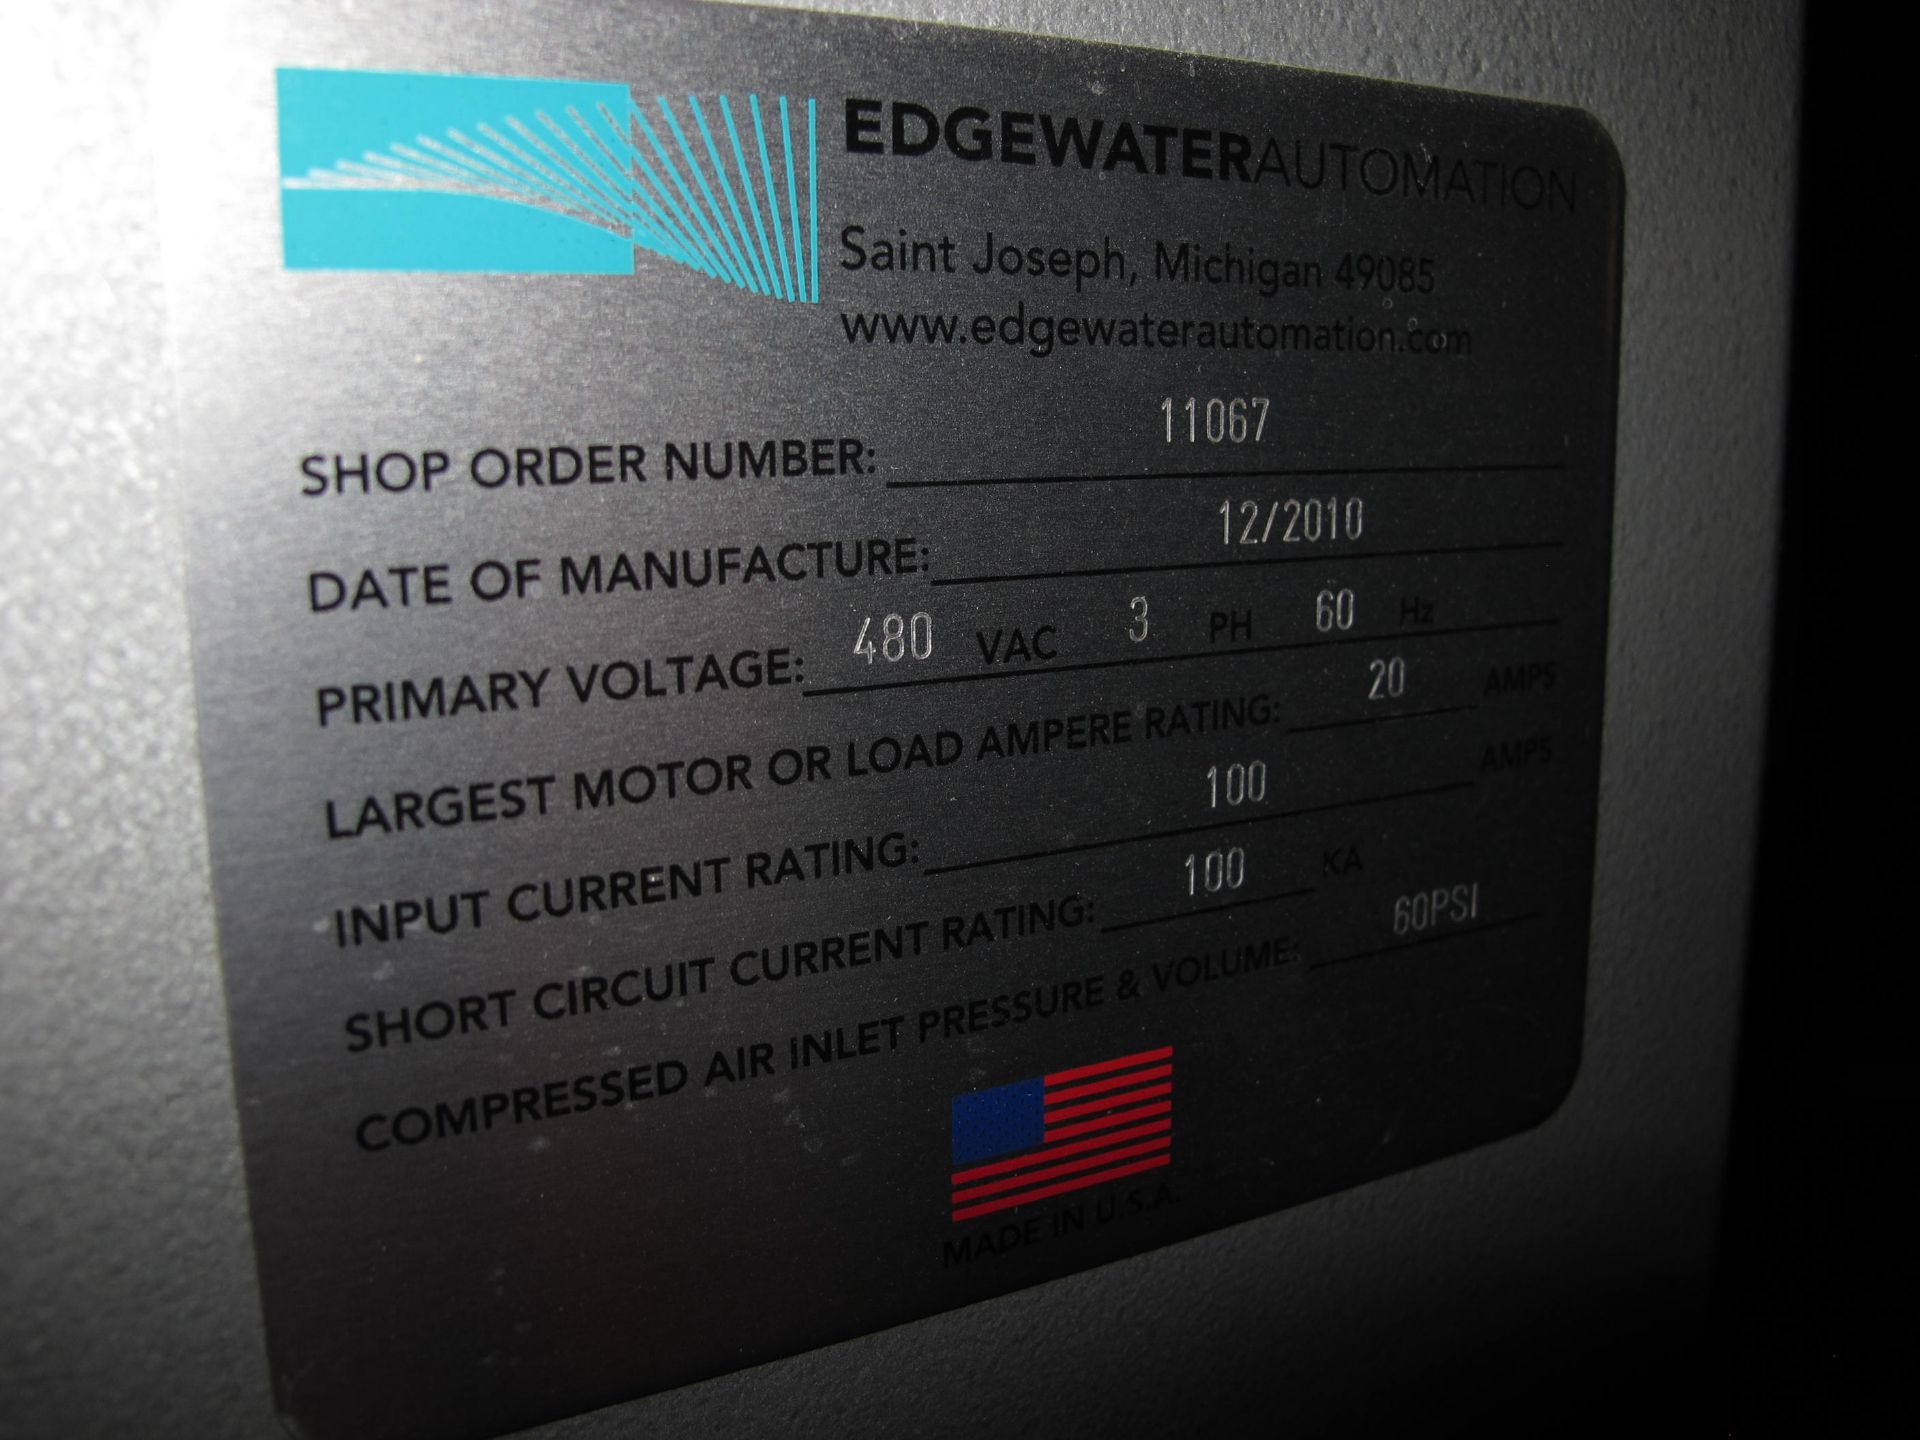 EDGEWATER AUTOMATION CONTROL PANEL FOR ASSEMBLY LINE, SHOP ORDER 11067, MANUFACTURED DATE DECEMBER - Image 4 of 4